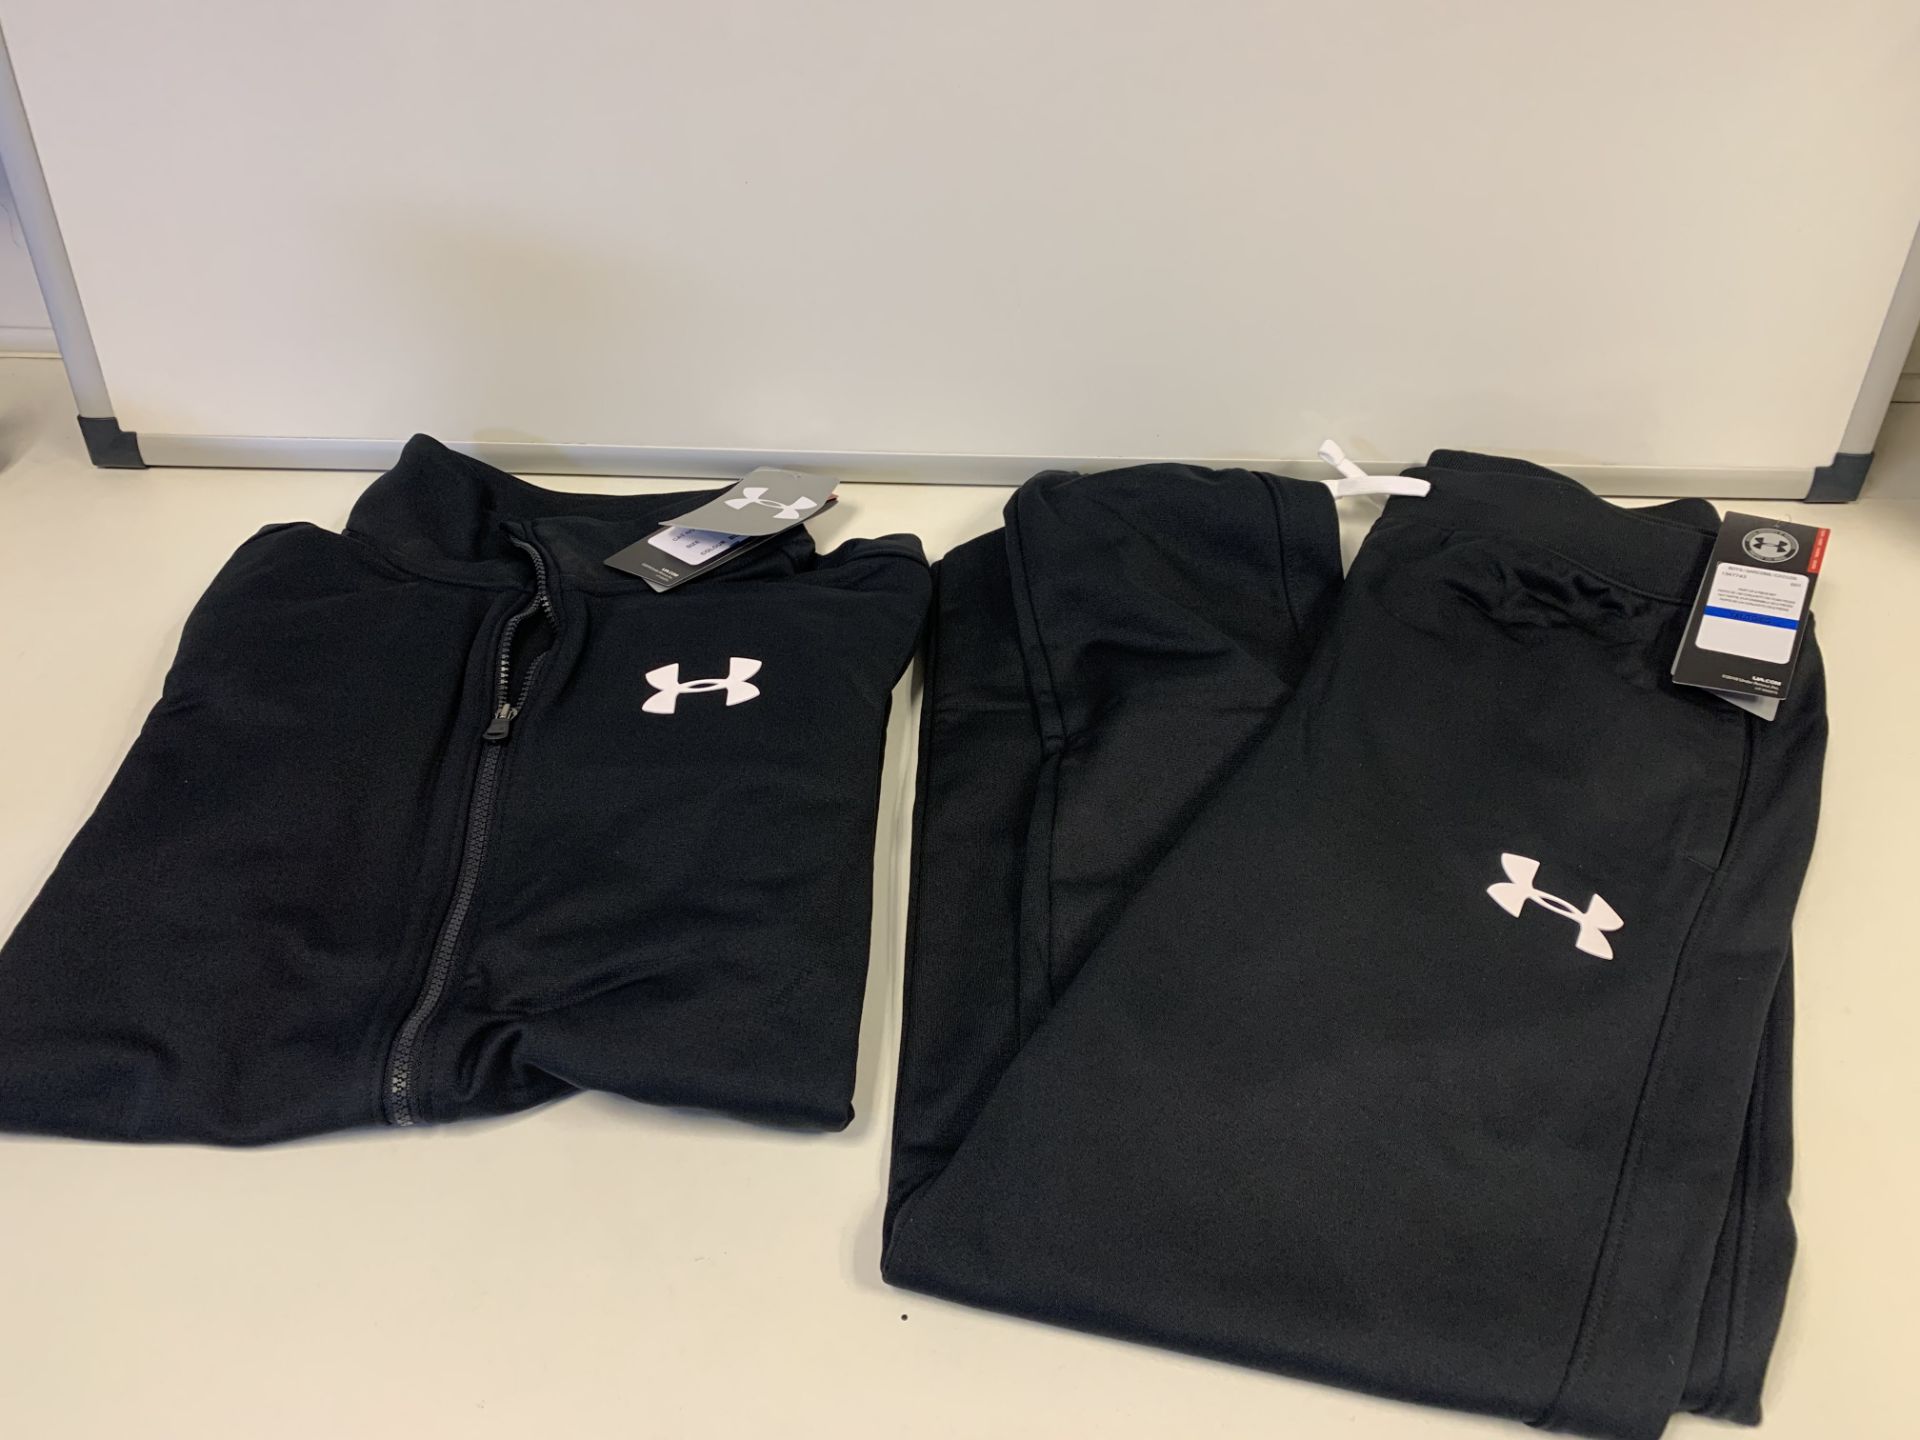 5 X BRAND NEW CHILDRENS UNDER ARMOUR FULL TRACKSUITS BLACK BOYS 15-16